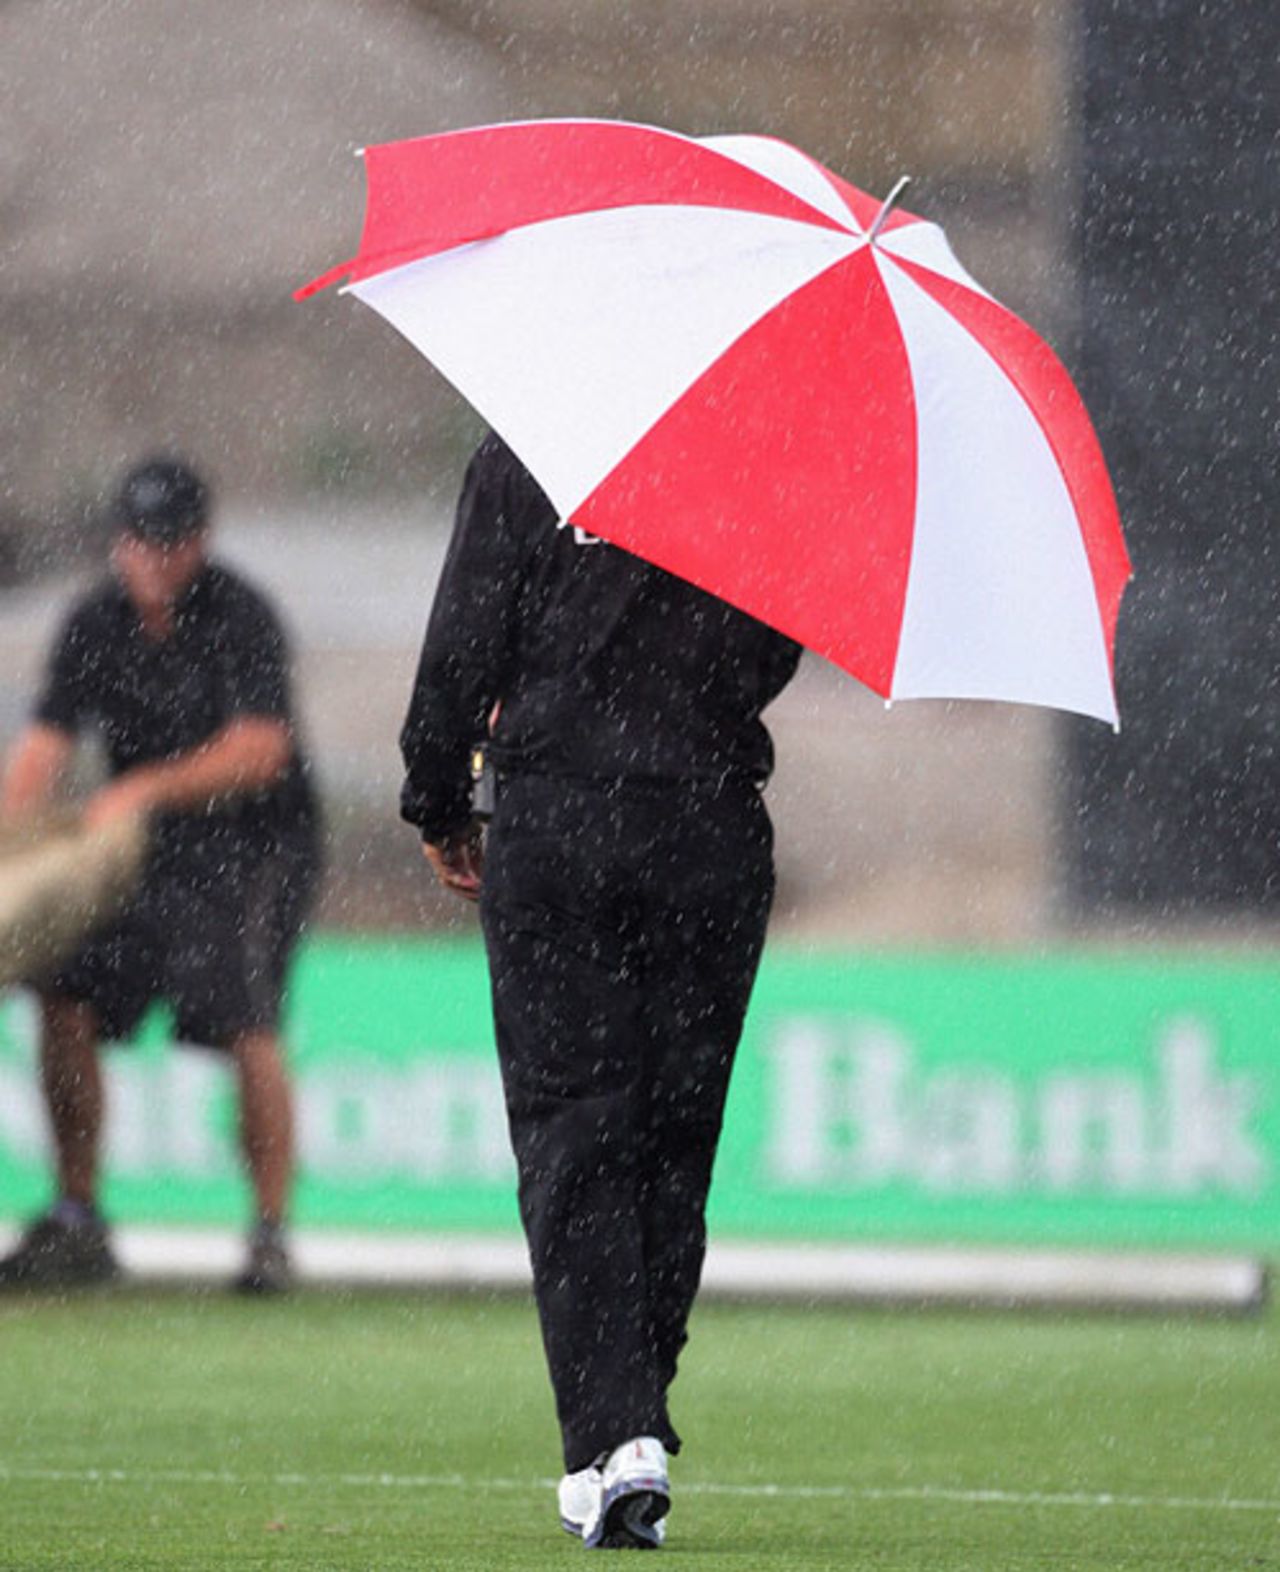 Rain interrupts play in Auckland, New Zealand v West Indies, 4th ODI, Auckland, January 10, 2009